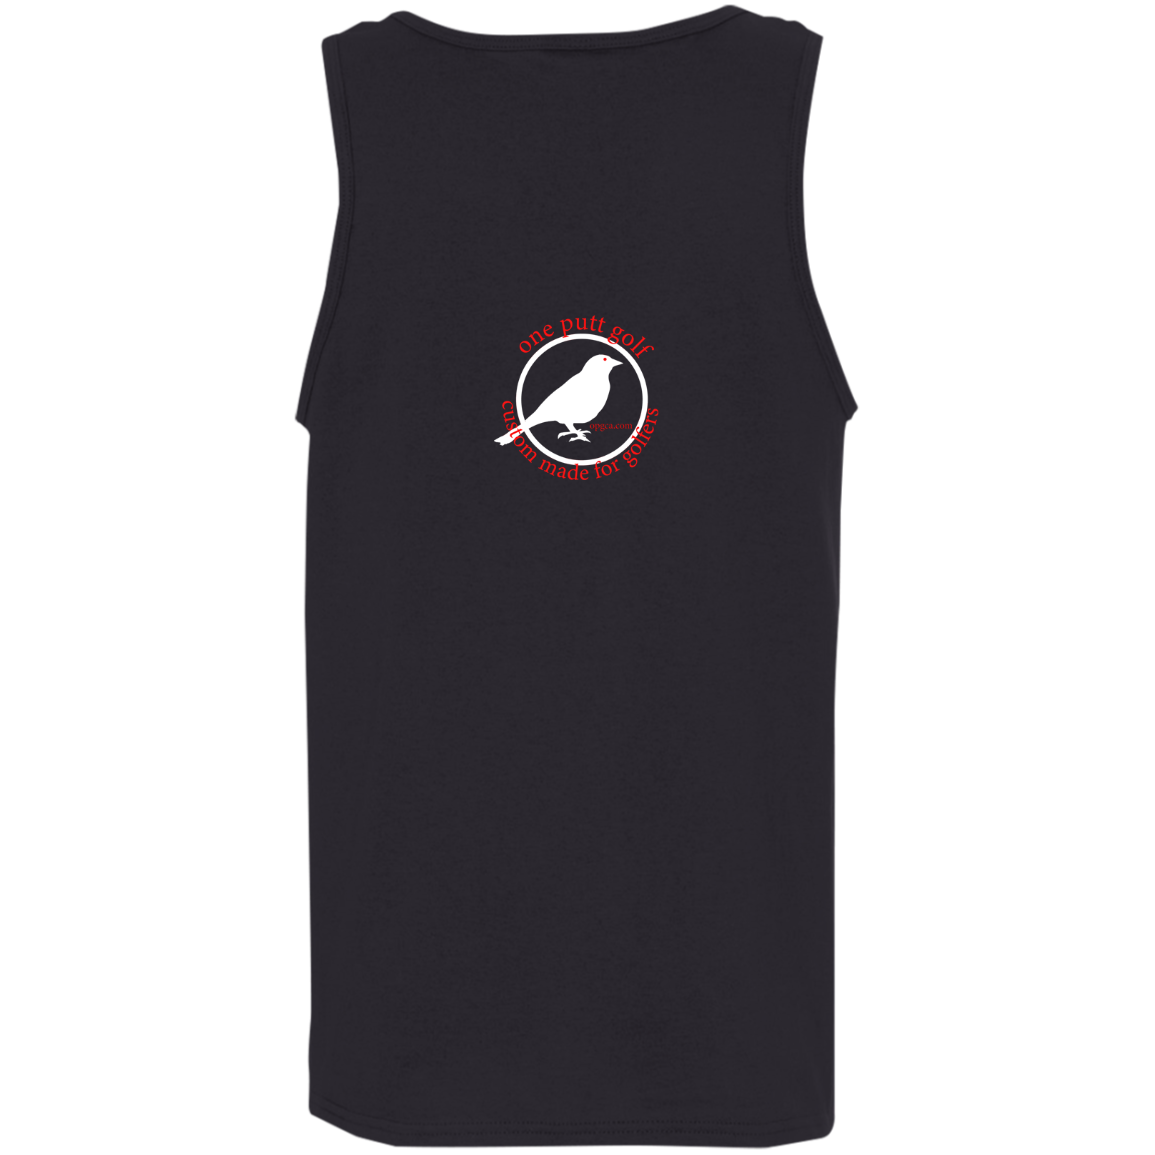 OPG Custom Design # 24. Ornithologist. A person who studies or is an expert on birds. Cotton Tank Top 5.3 oz.